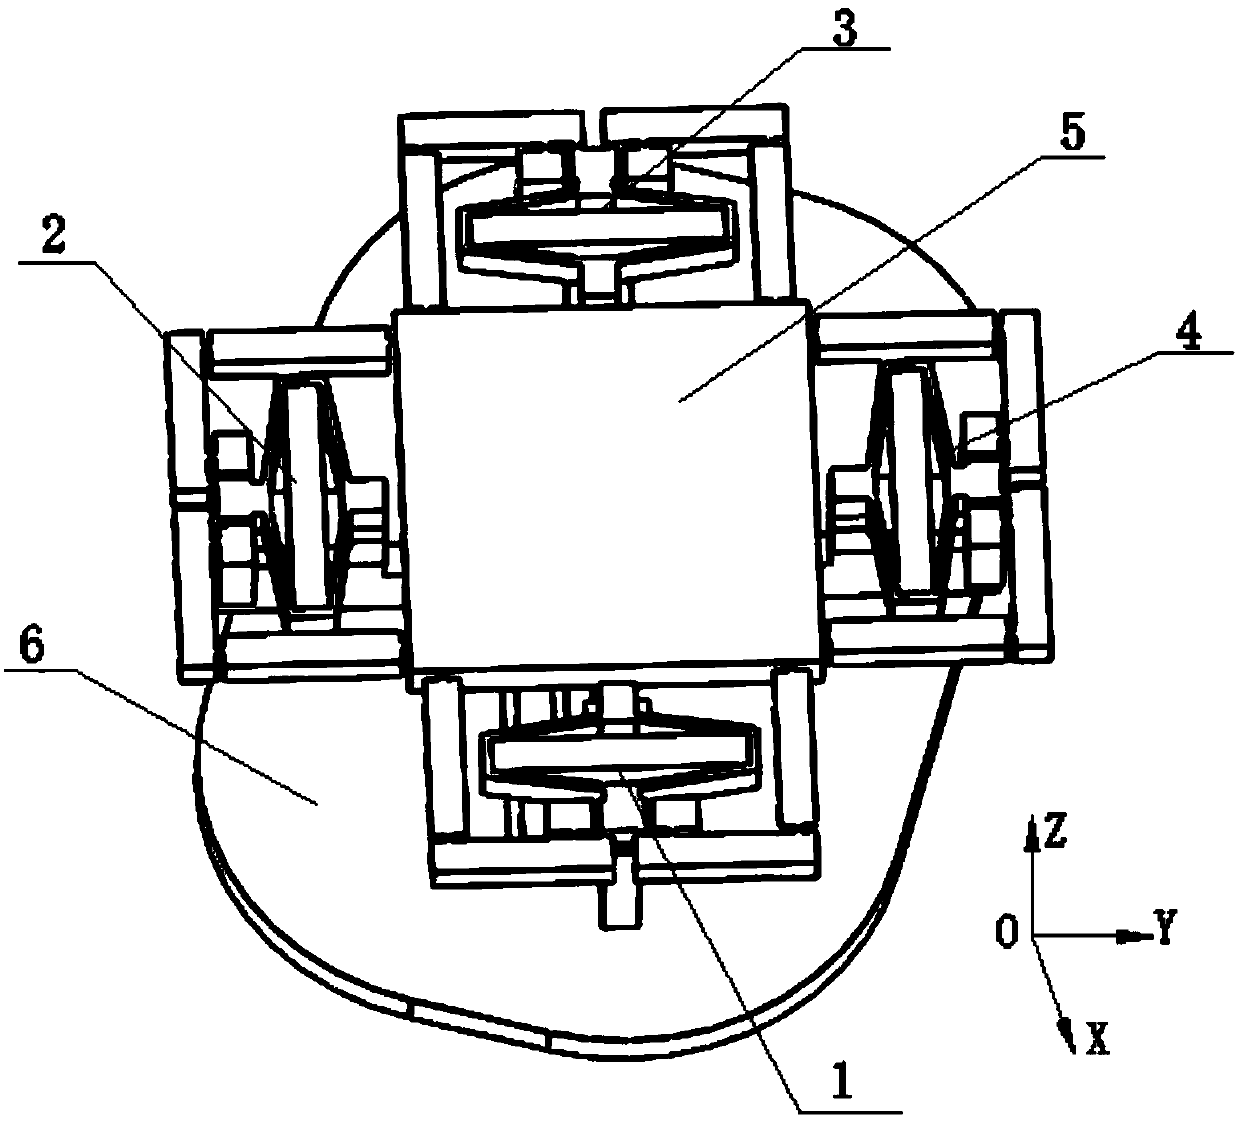 Three-degree-of-freedom piezoelectric drive adjustment device and method capable of realizing translation and rotation